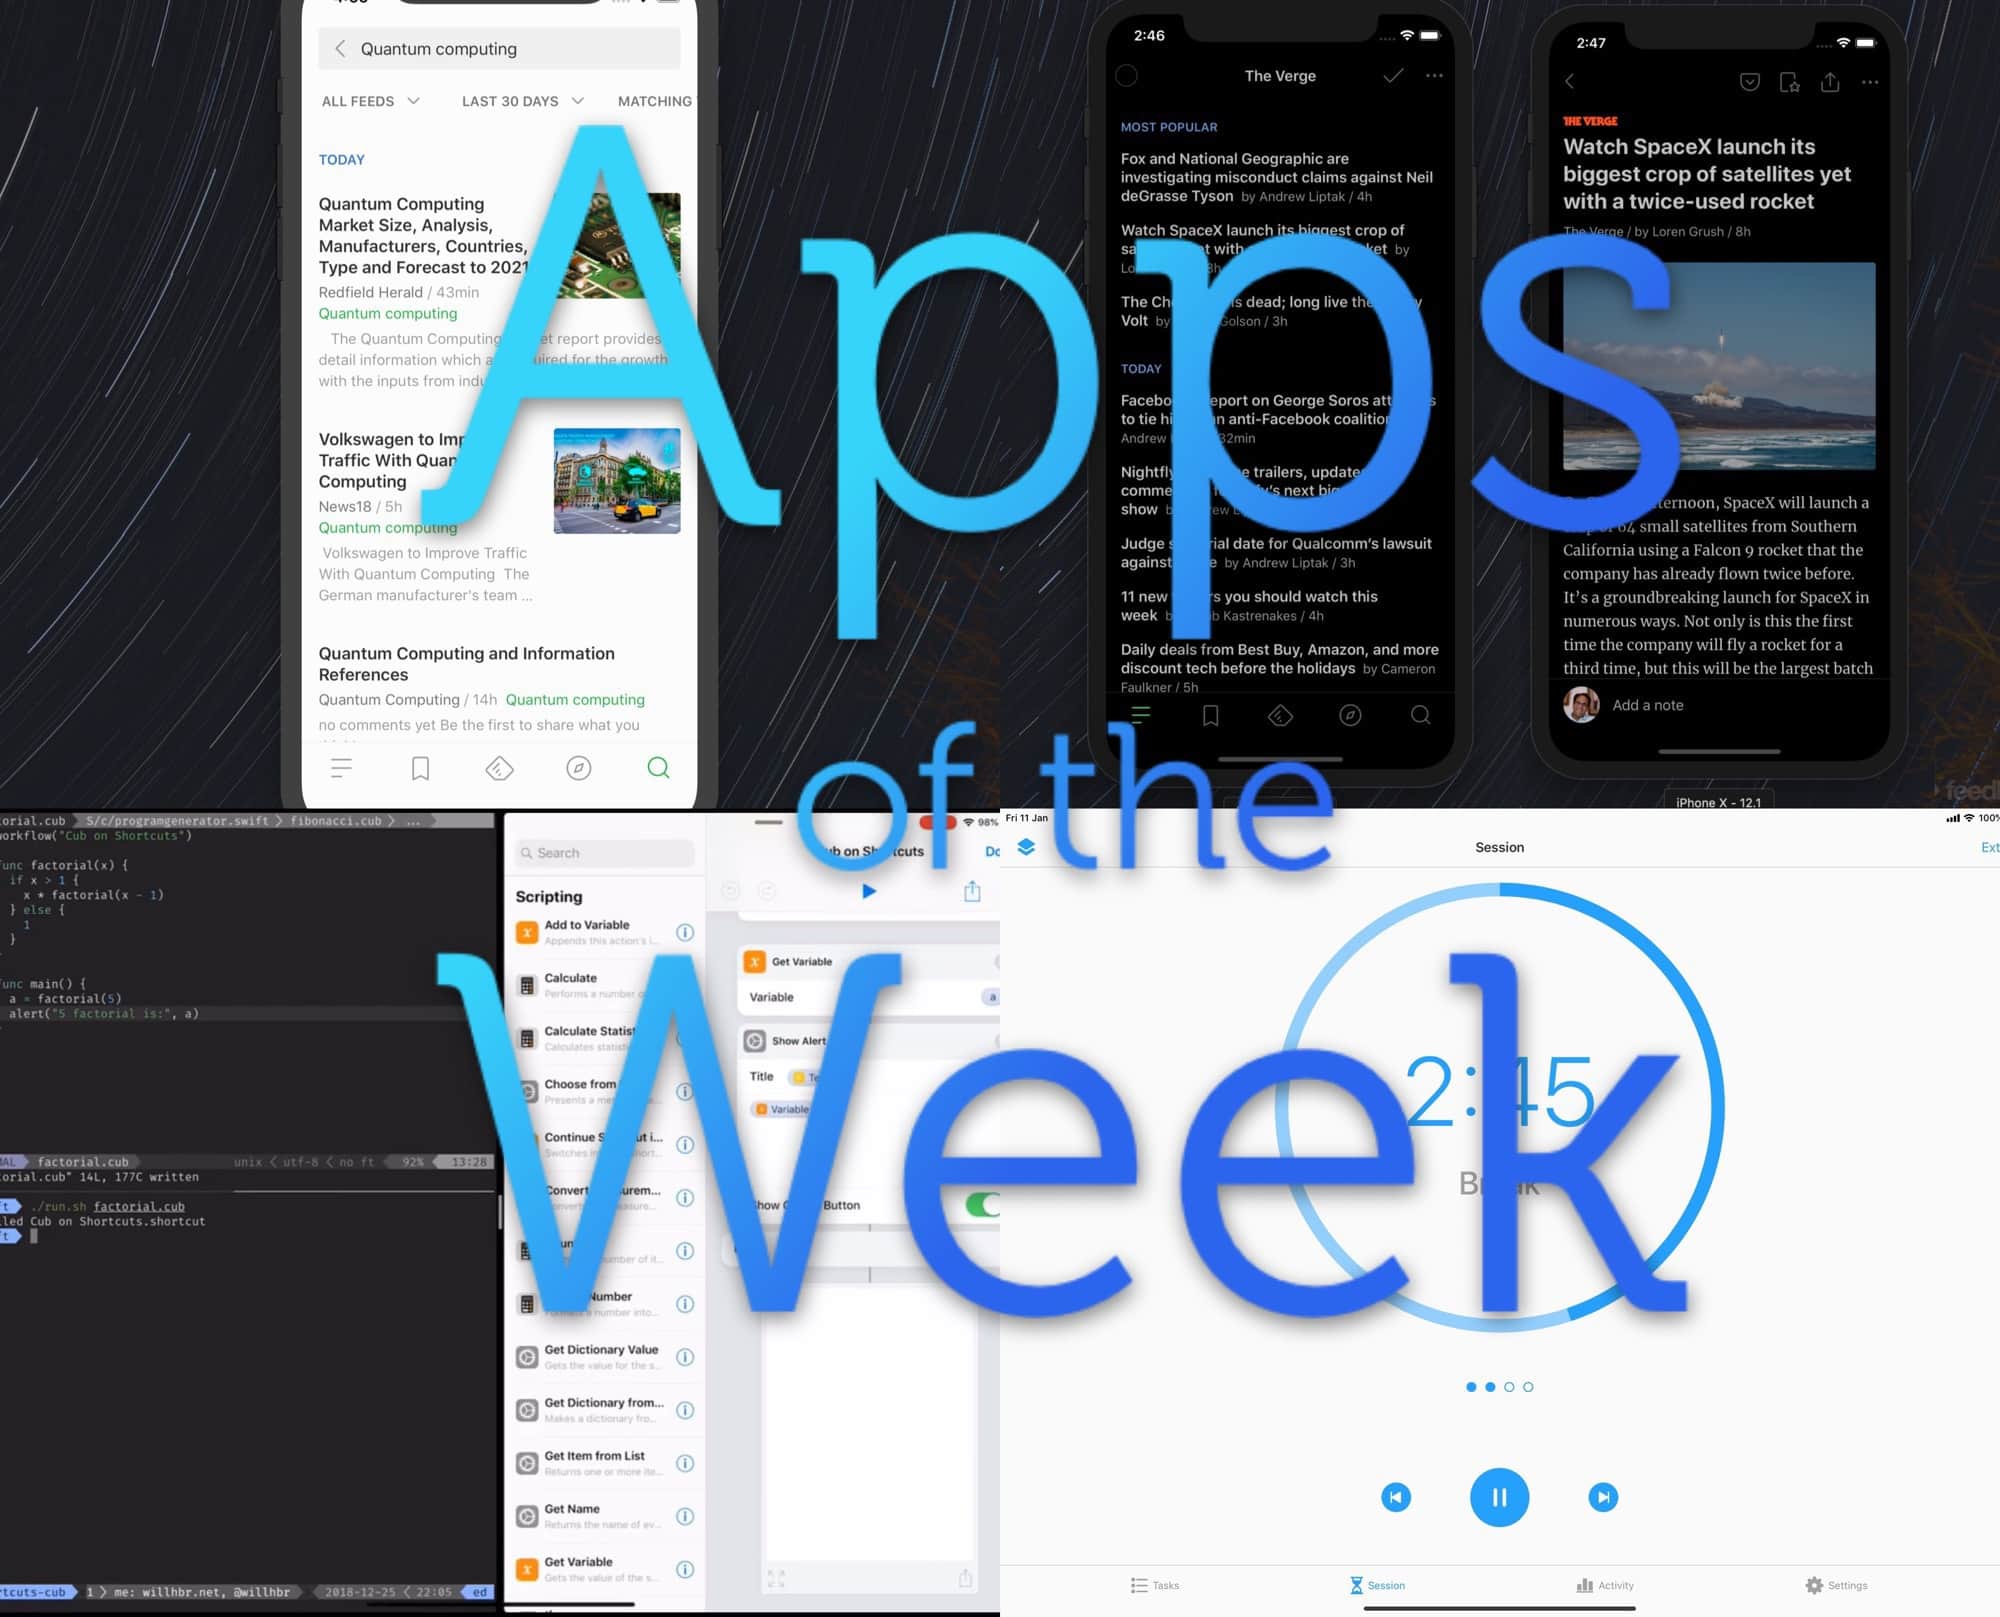 Check out this week’s amazing apps, you lucky people.